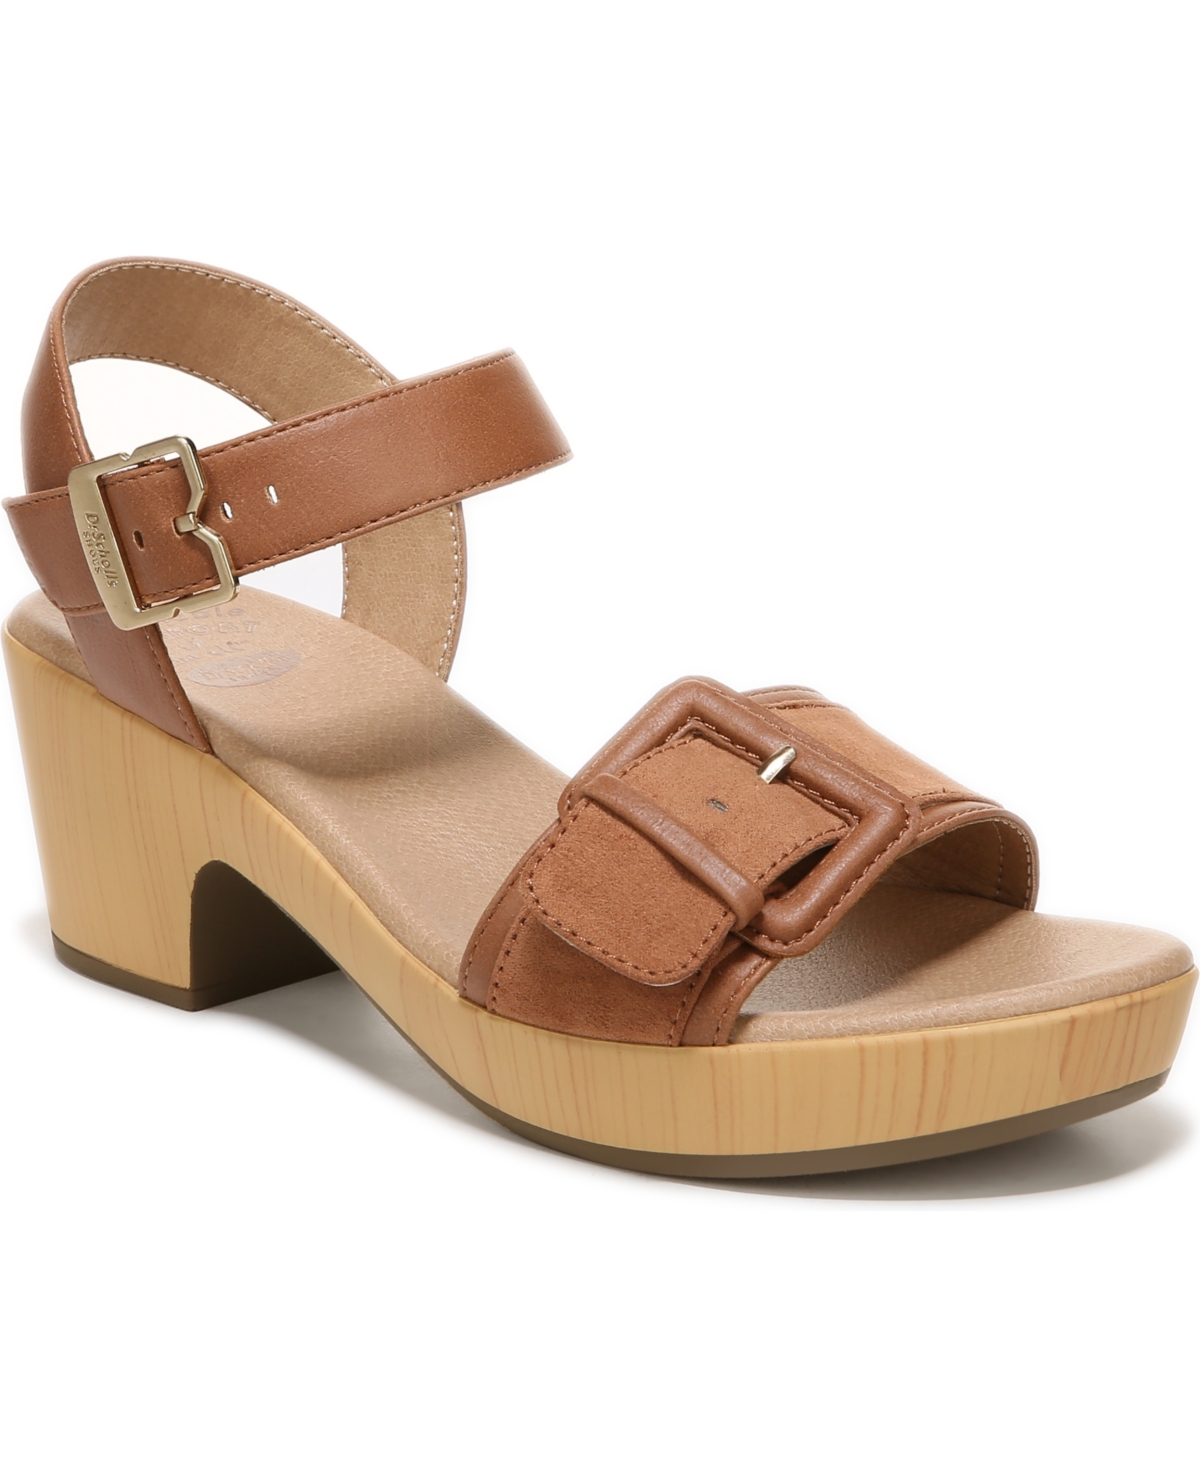 UPC 017116808642 product image for Dr. Scholl's Women's Felicity Too Ankle Strap Sandals Women's Shoes | upcitemdb.com